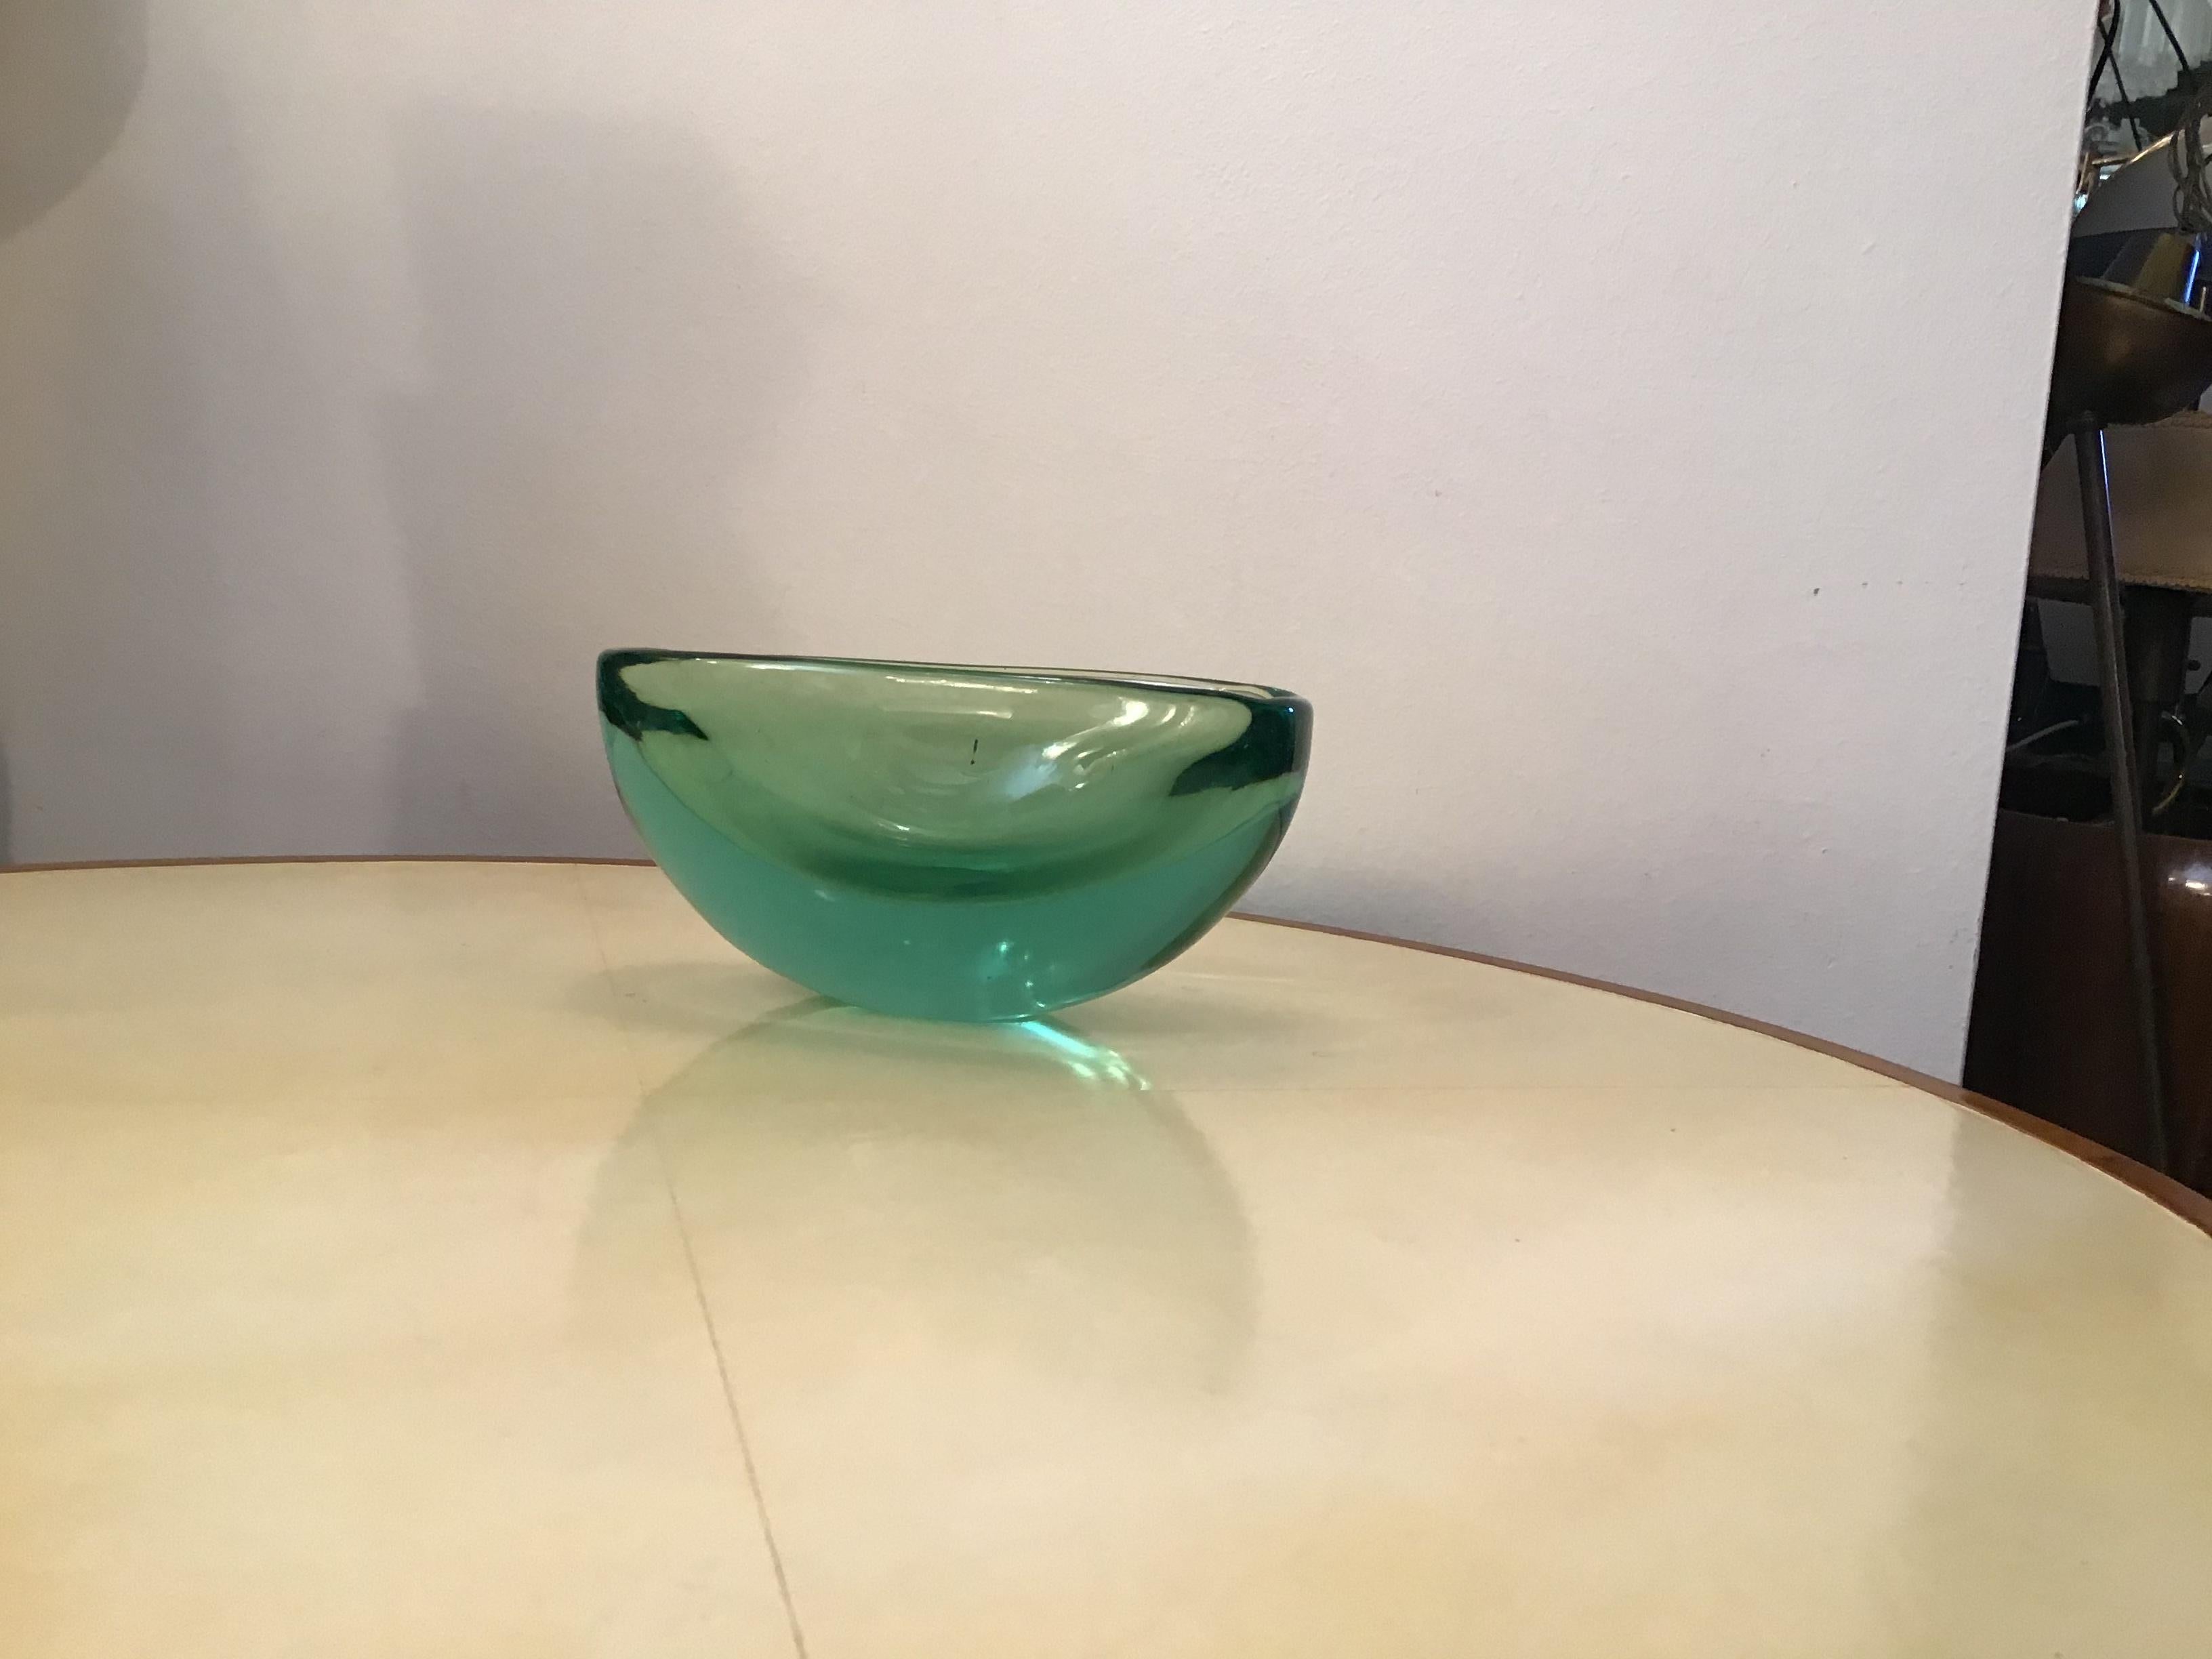 Archimede Seguso Oval Bowl, Green Submerged Glass Centrepiece, 1950 For Sale 2